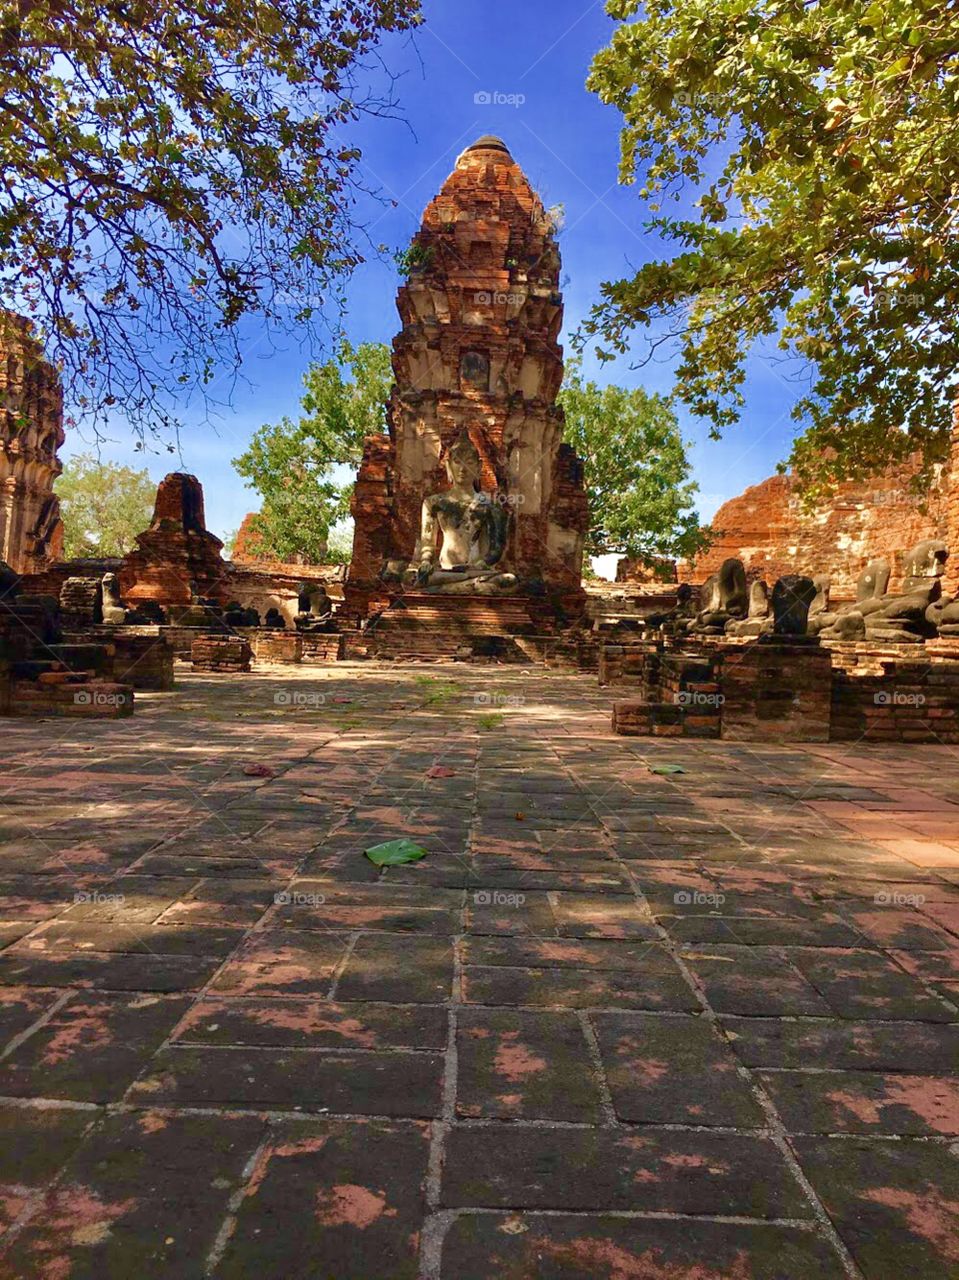 Temple ruins in Ayutthaya in front of the blue sky surrounding by green trees as the reddish colors of the bricks  stand out in different shades.